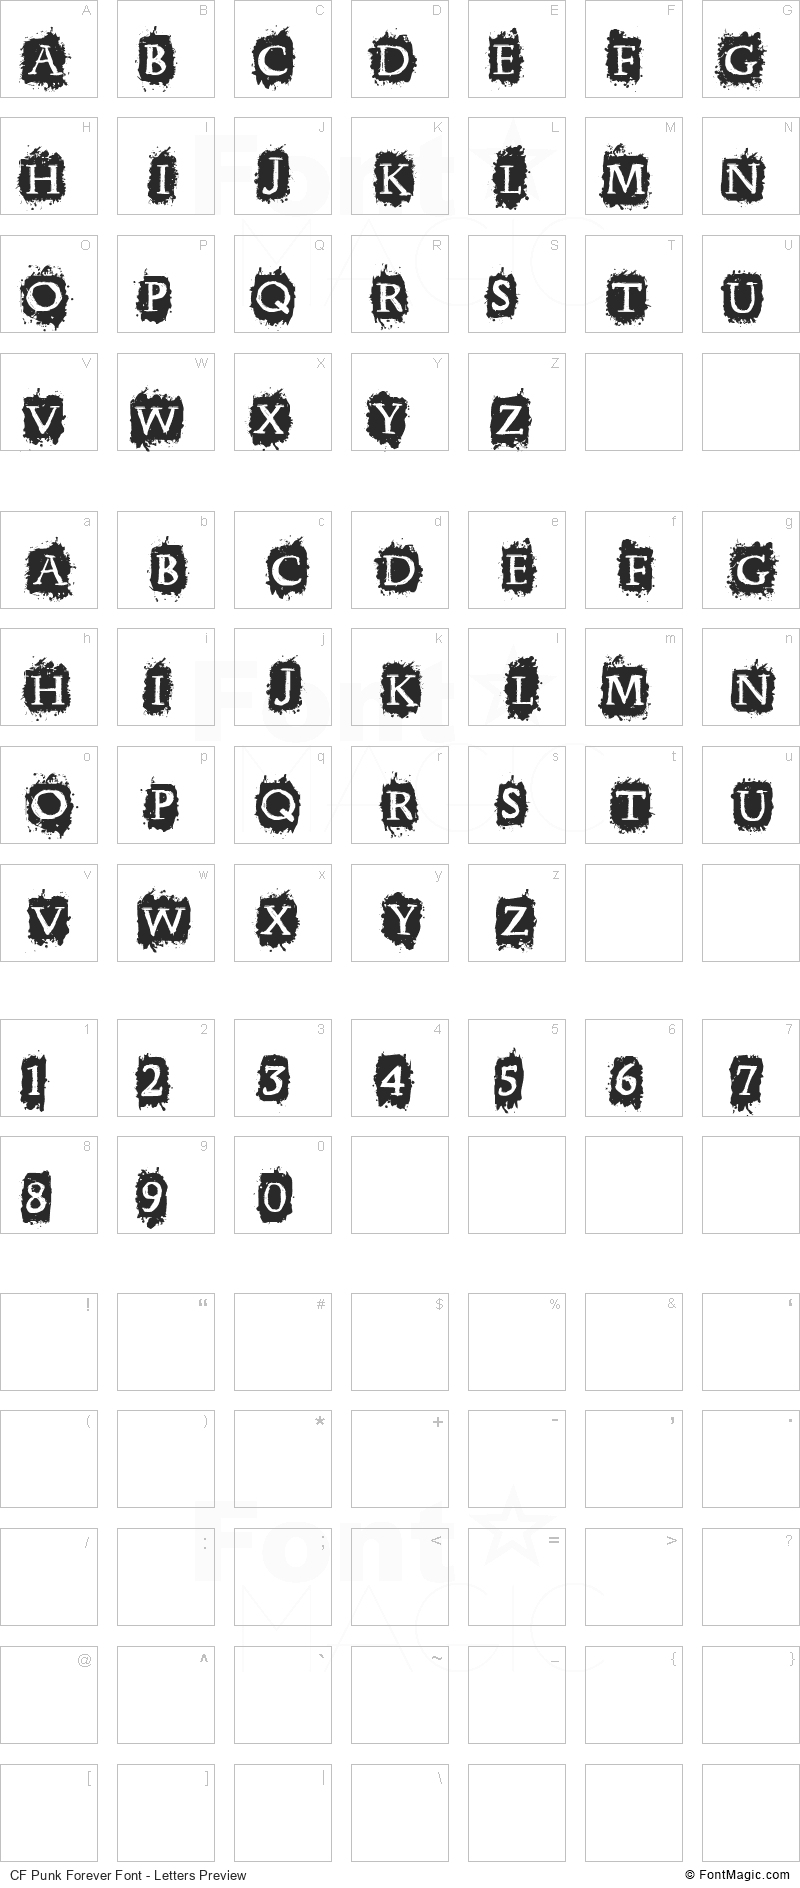 CF Punk Forever Font - All Latters Preview Chart